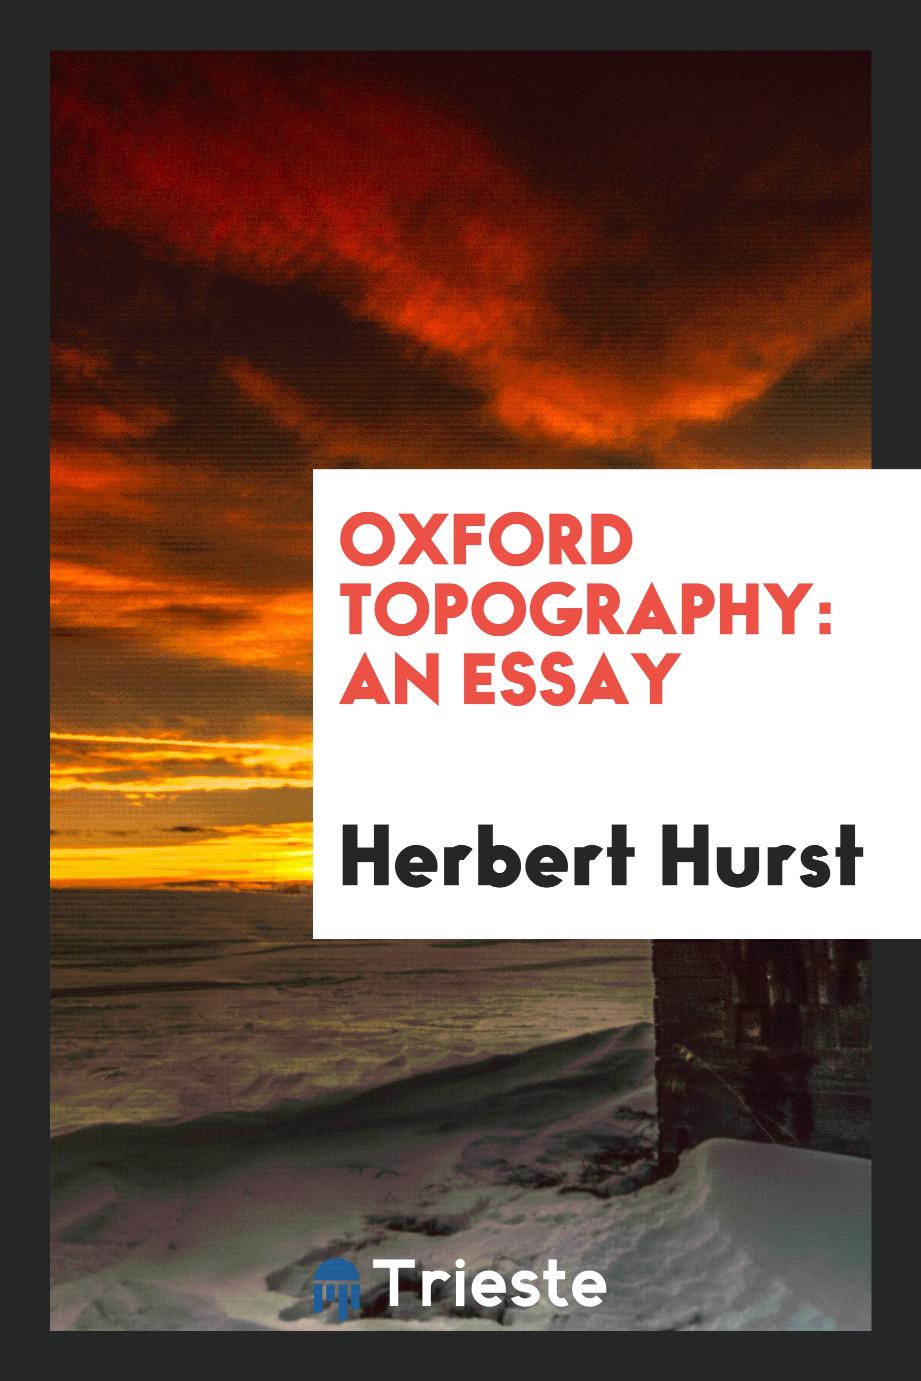 Oxford topography: an essay